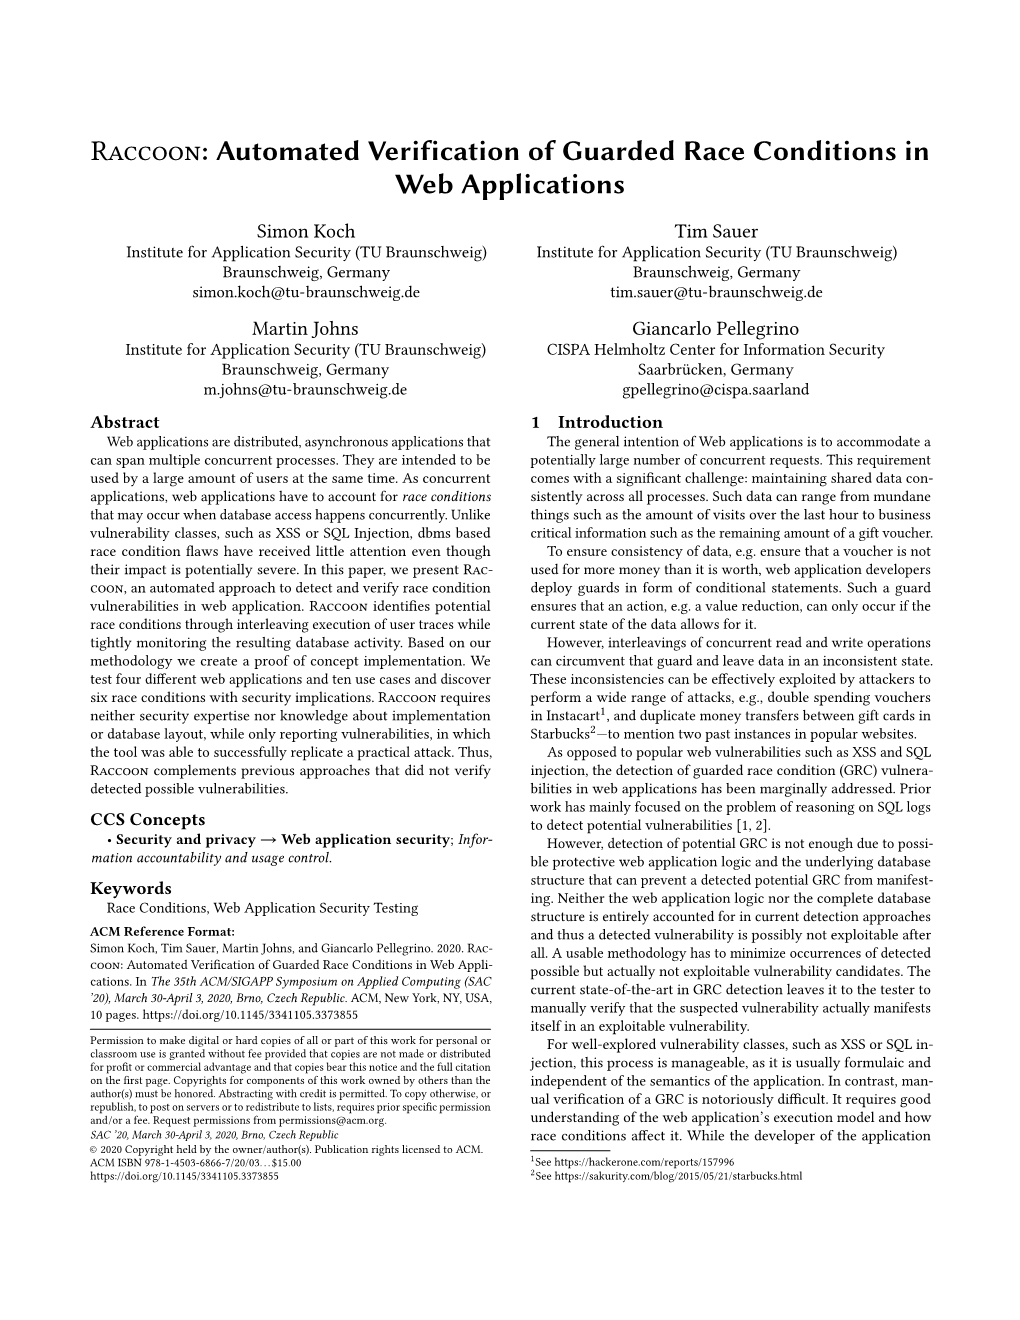 Automated Verification of Guarded Race Conditions in Web Applications